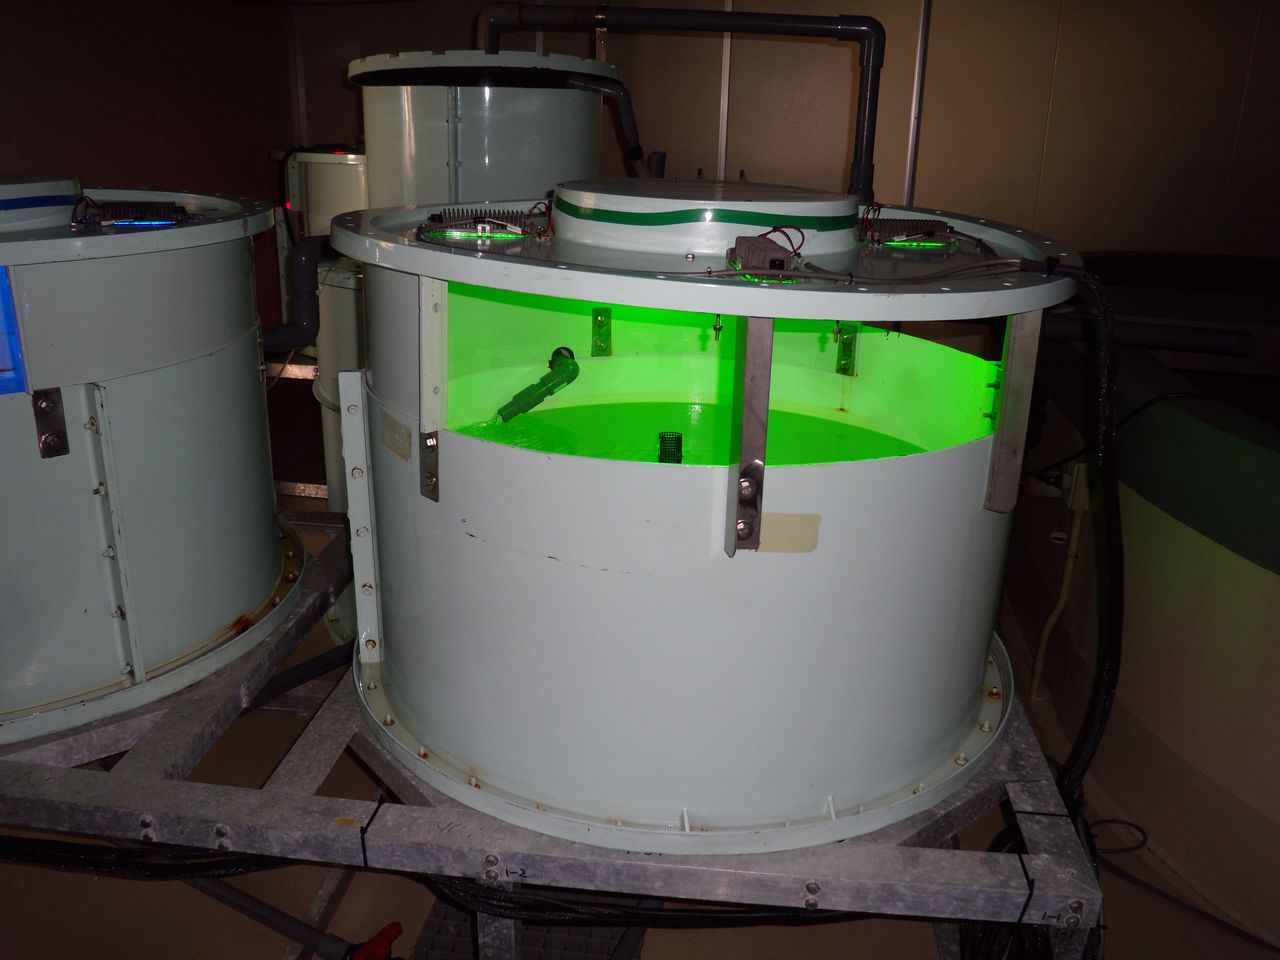 This tank, lit by green LEDs, was used in flounder farming experiments. (© Kitasato University School of Marine Biosciences)